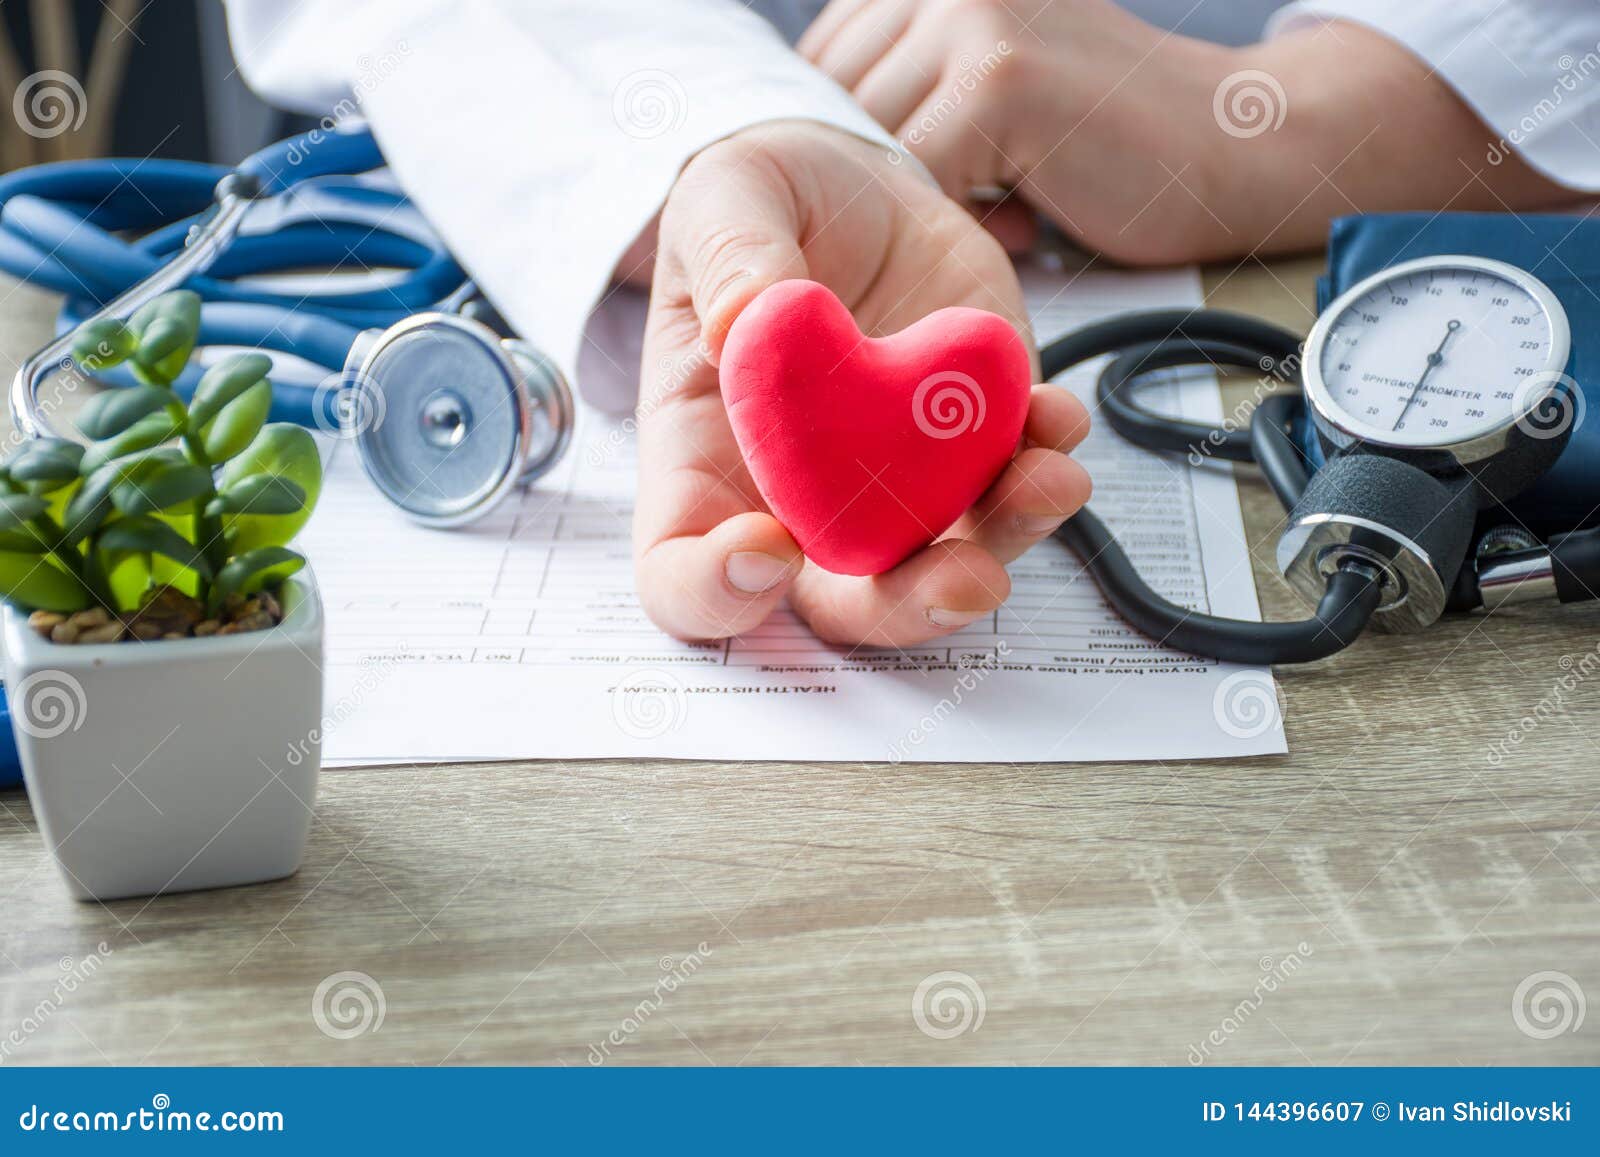 doctor of internal medicine and cardiologist holding in his hands and shows to patient figure of red card heart during medical con